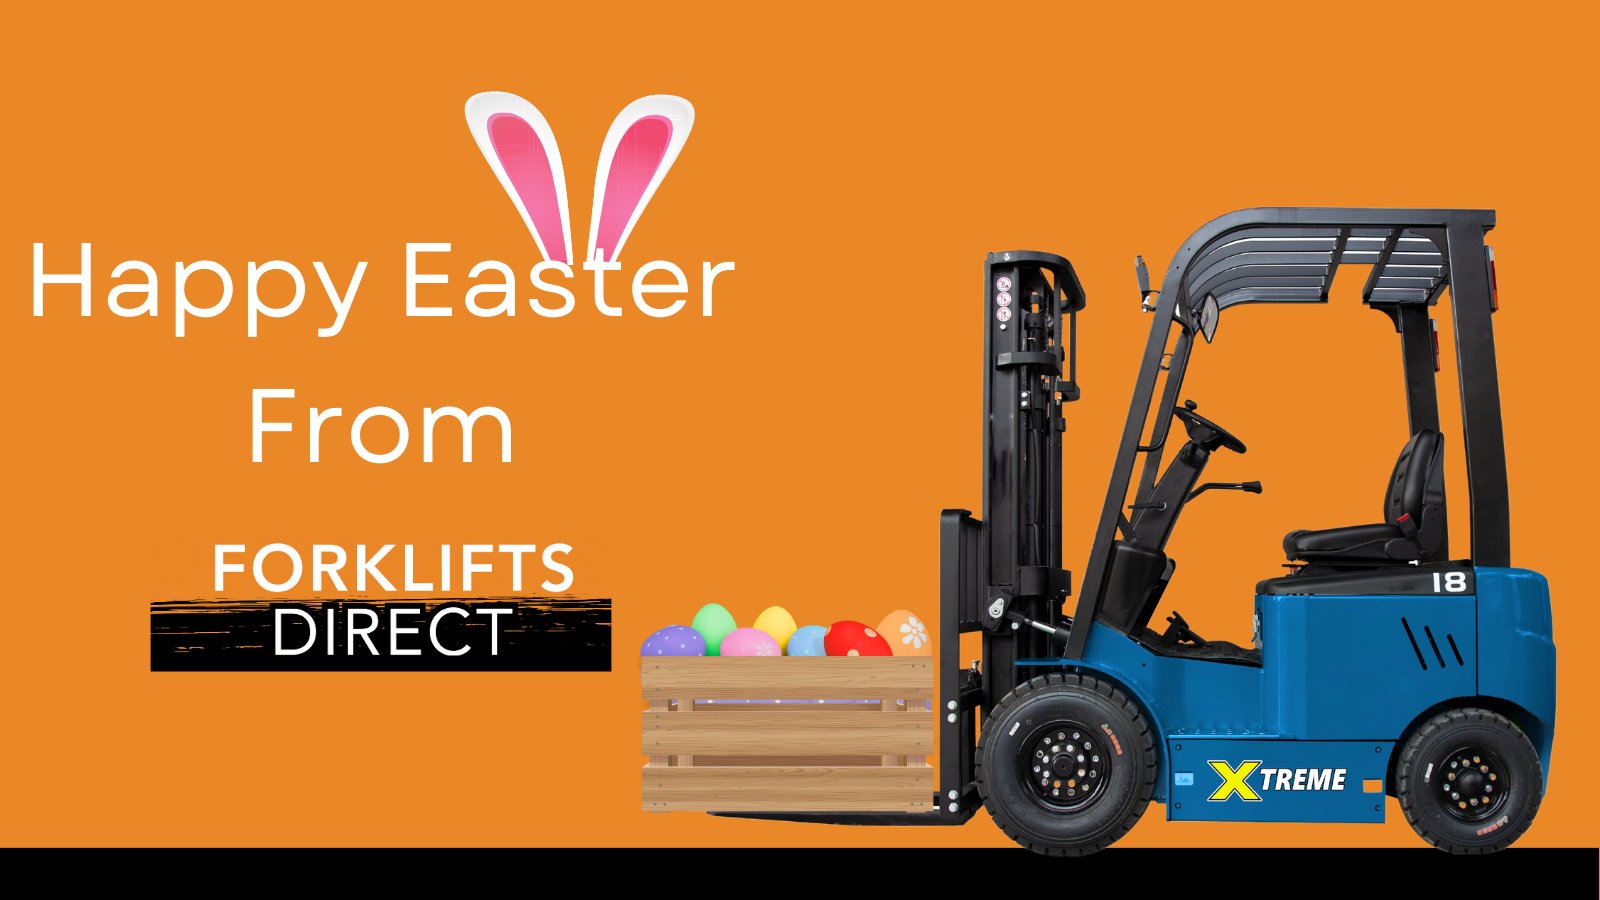 Forklifts Direct on X: See the Week 2 wrap up for our February